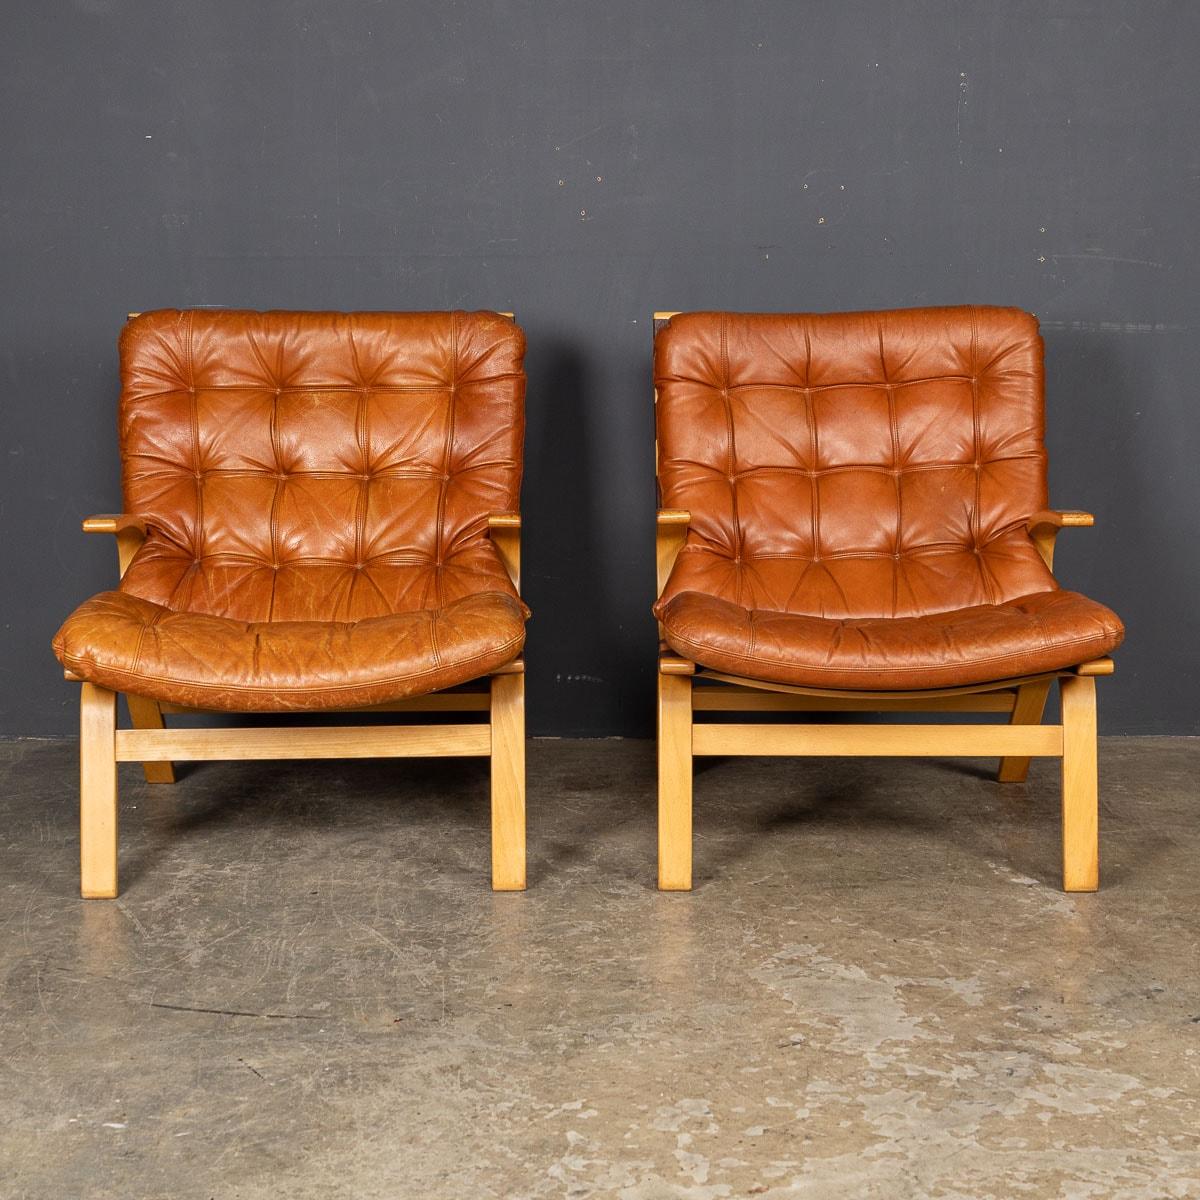 20th Century Danish Curved Beech Tan Leather Chairs By Farstrup Møbler, c.1970 1